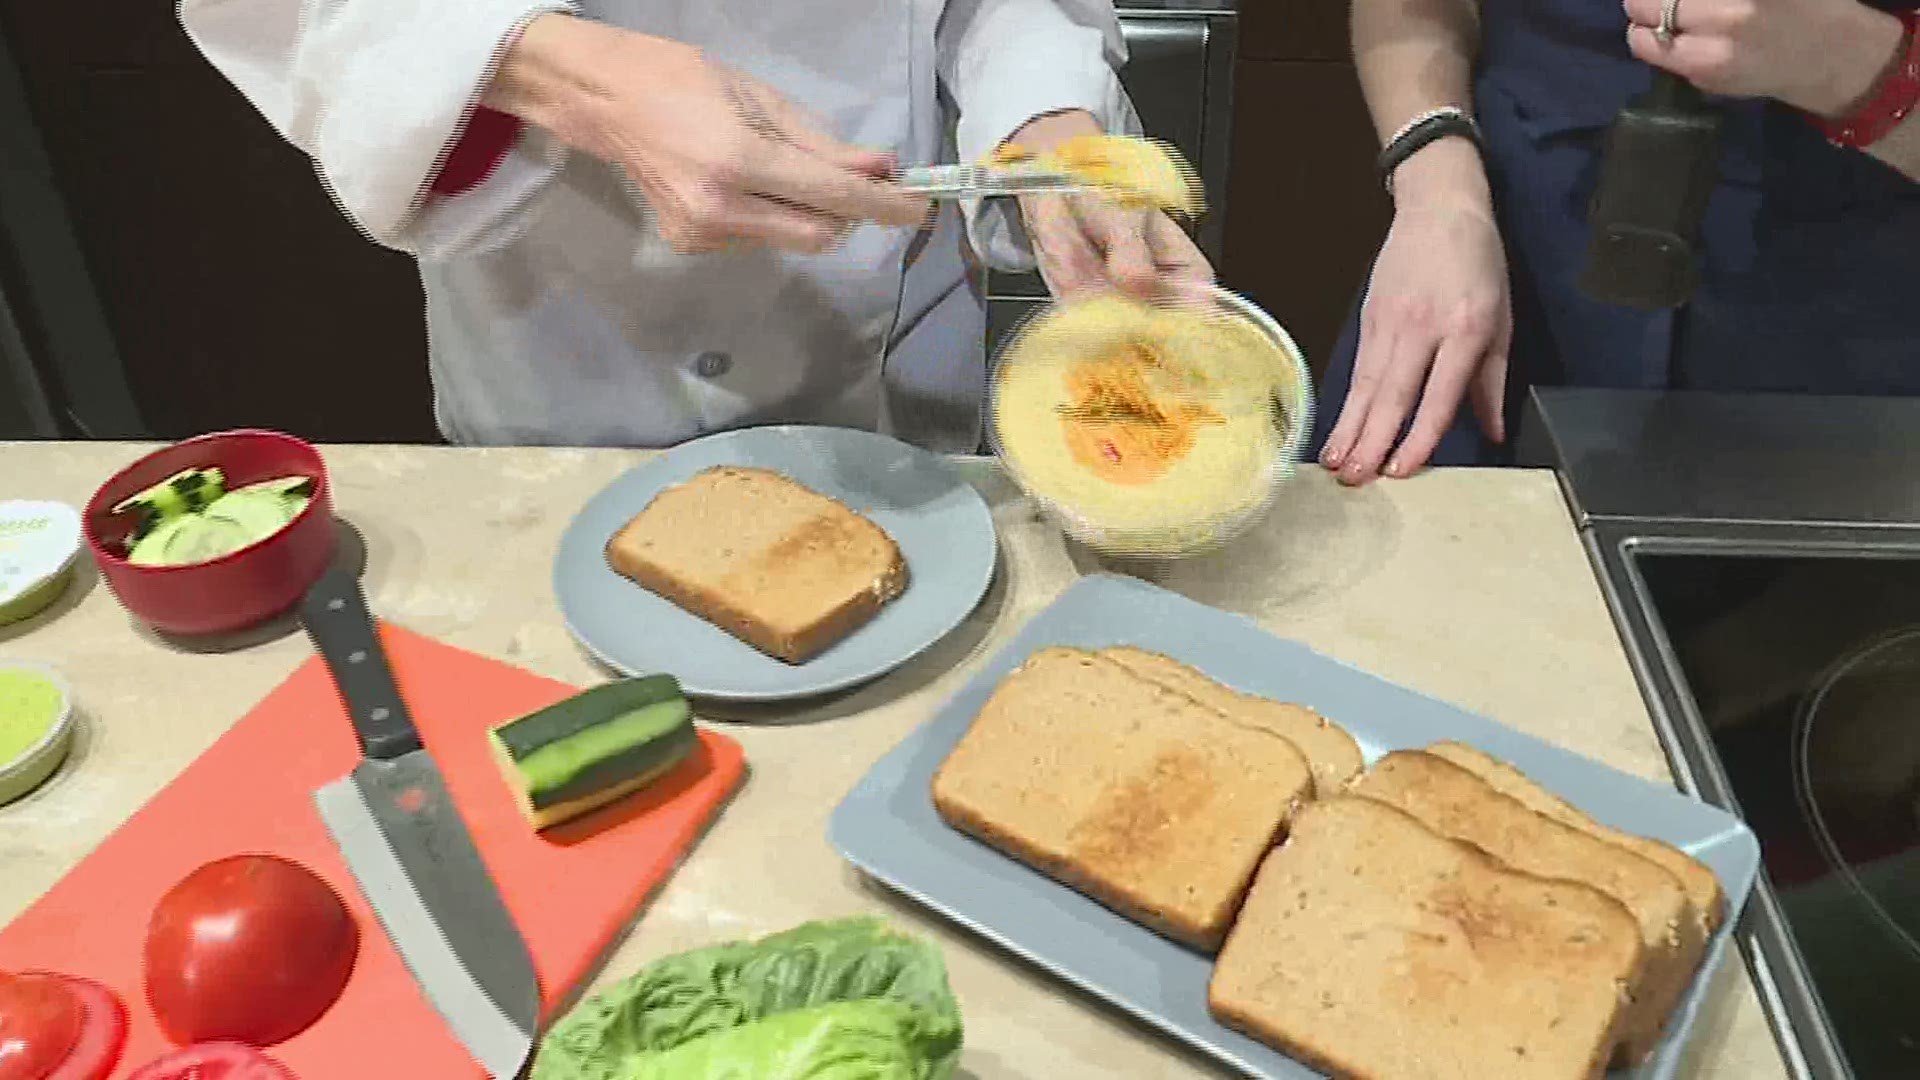 "Breakfast With..." features a heart-healthy breakfast dish demo - hummus toast!